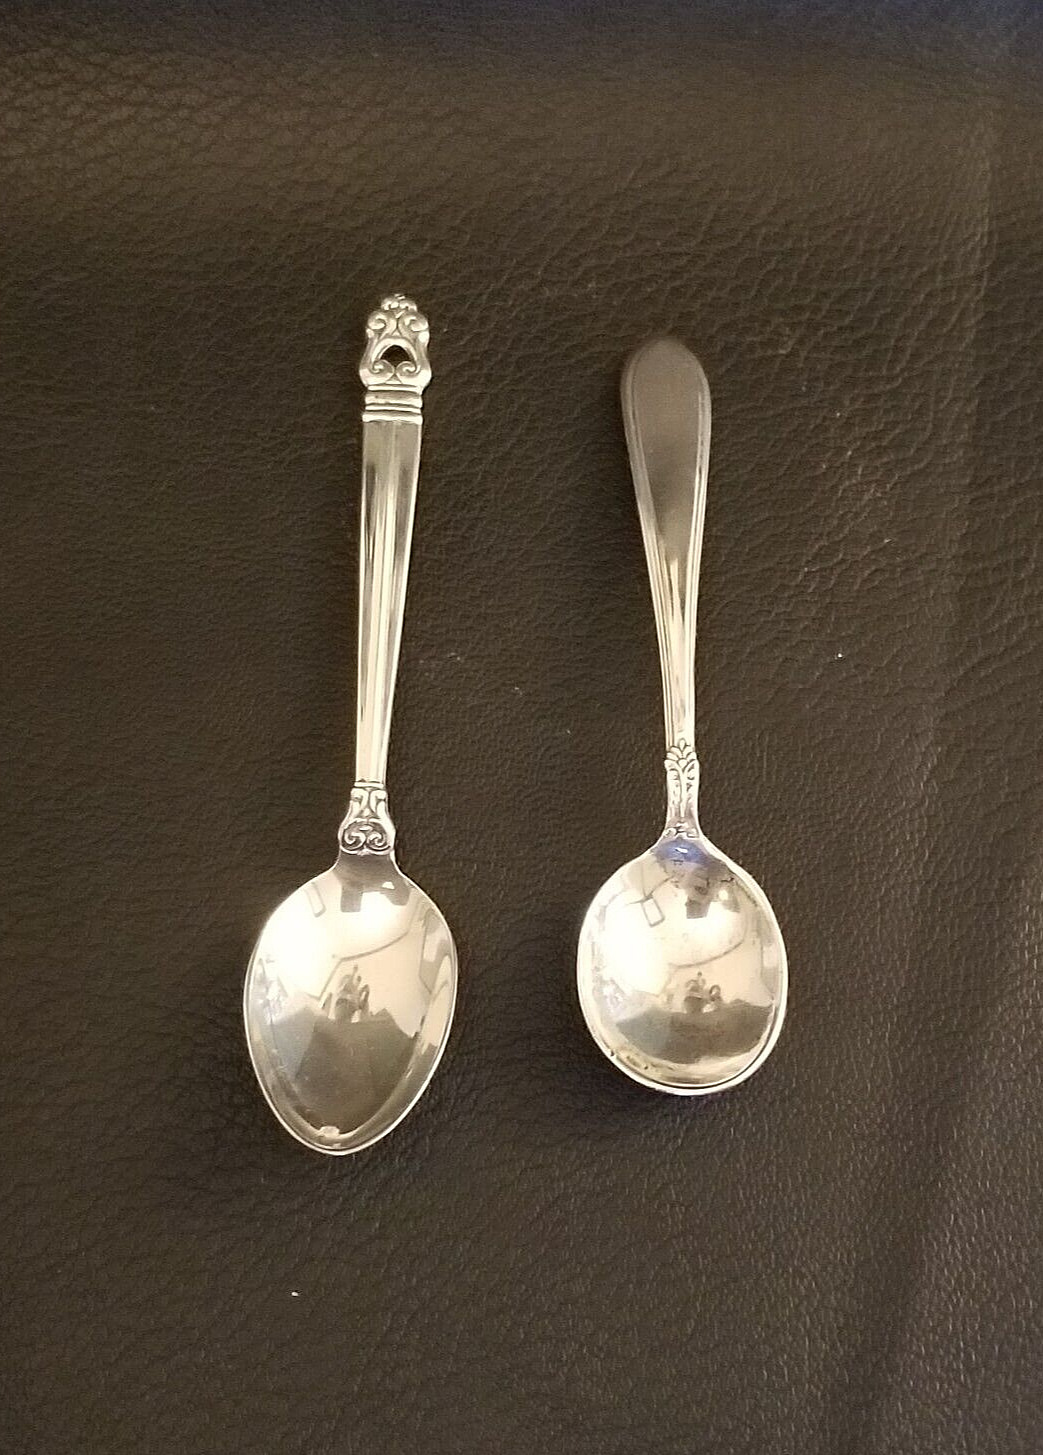 STERLING SILVER SPOONS INTERNATIONAL SILVER COMPANY & WEBSTER CO.